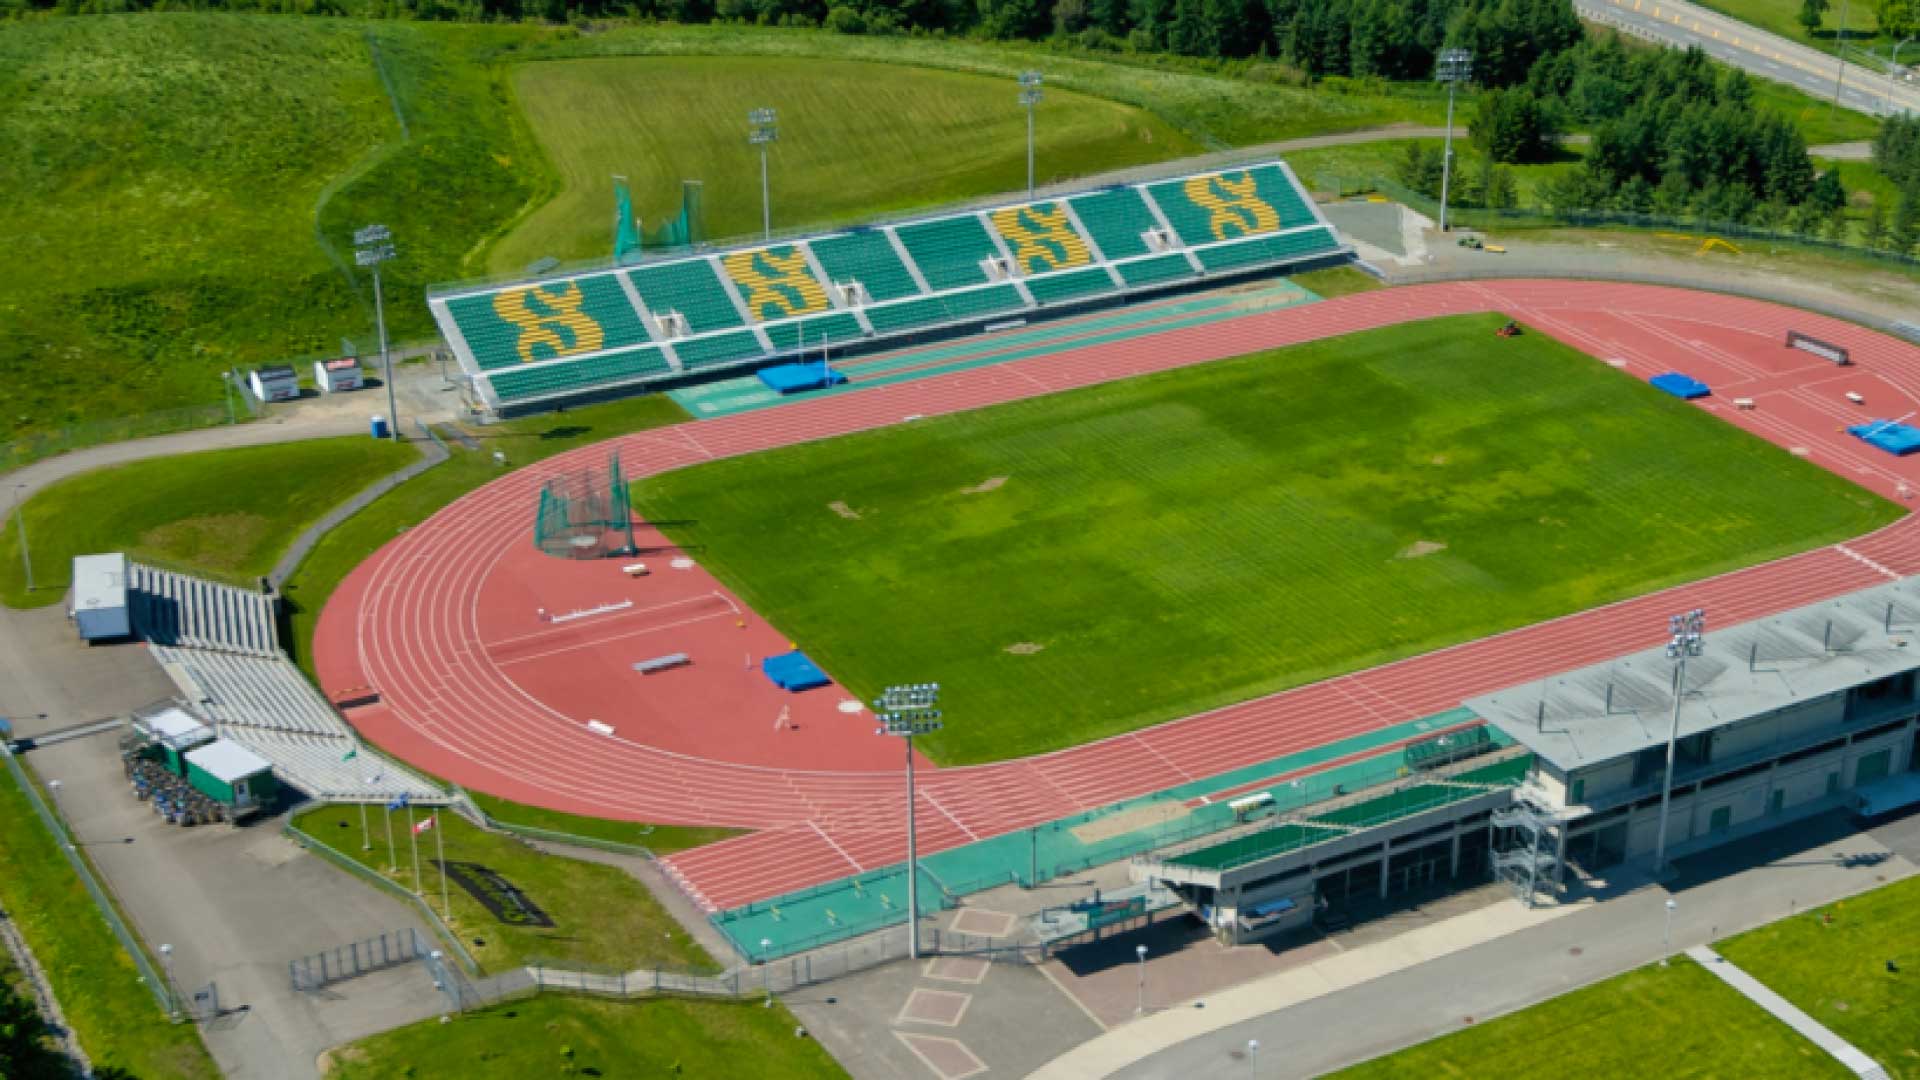 Piste d'athlétisme  Track and field, Track pictures, Track and